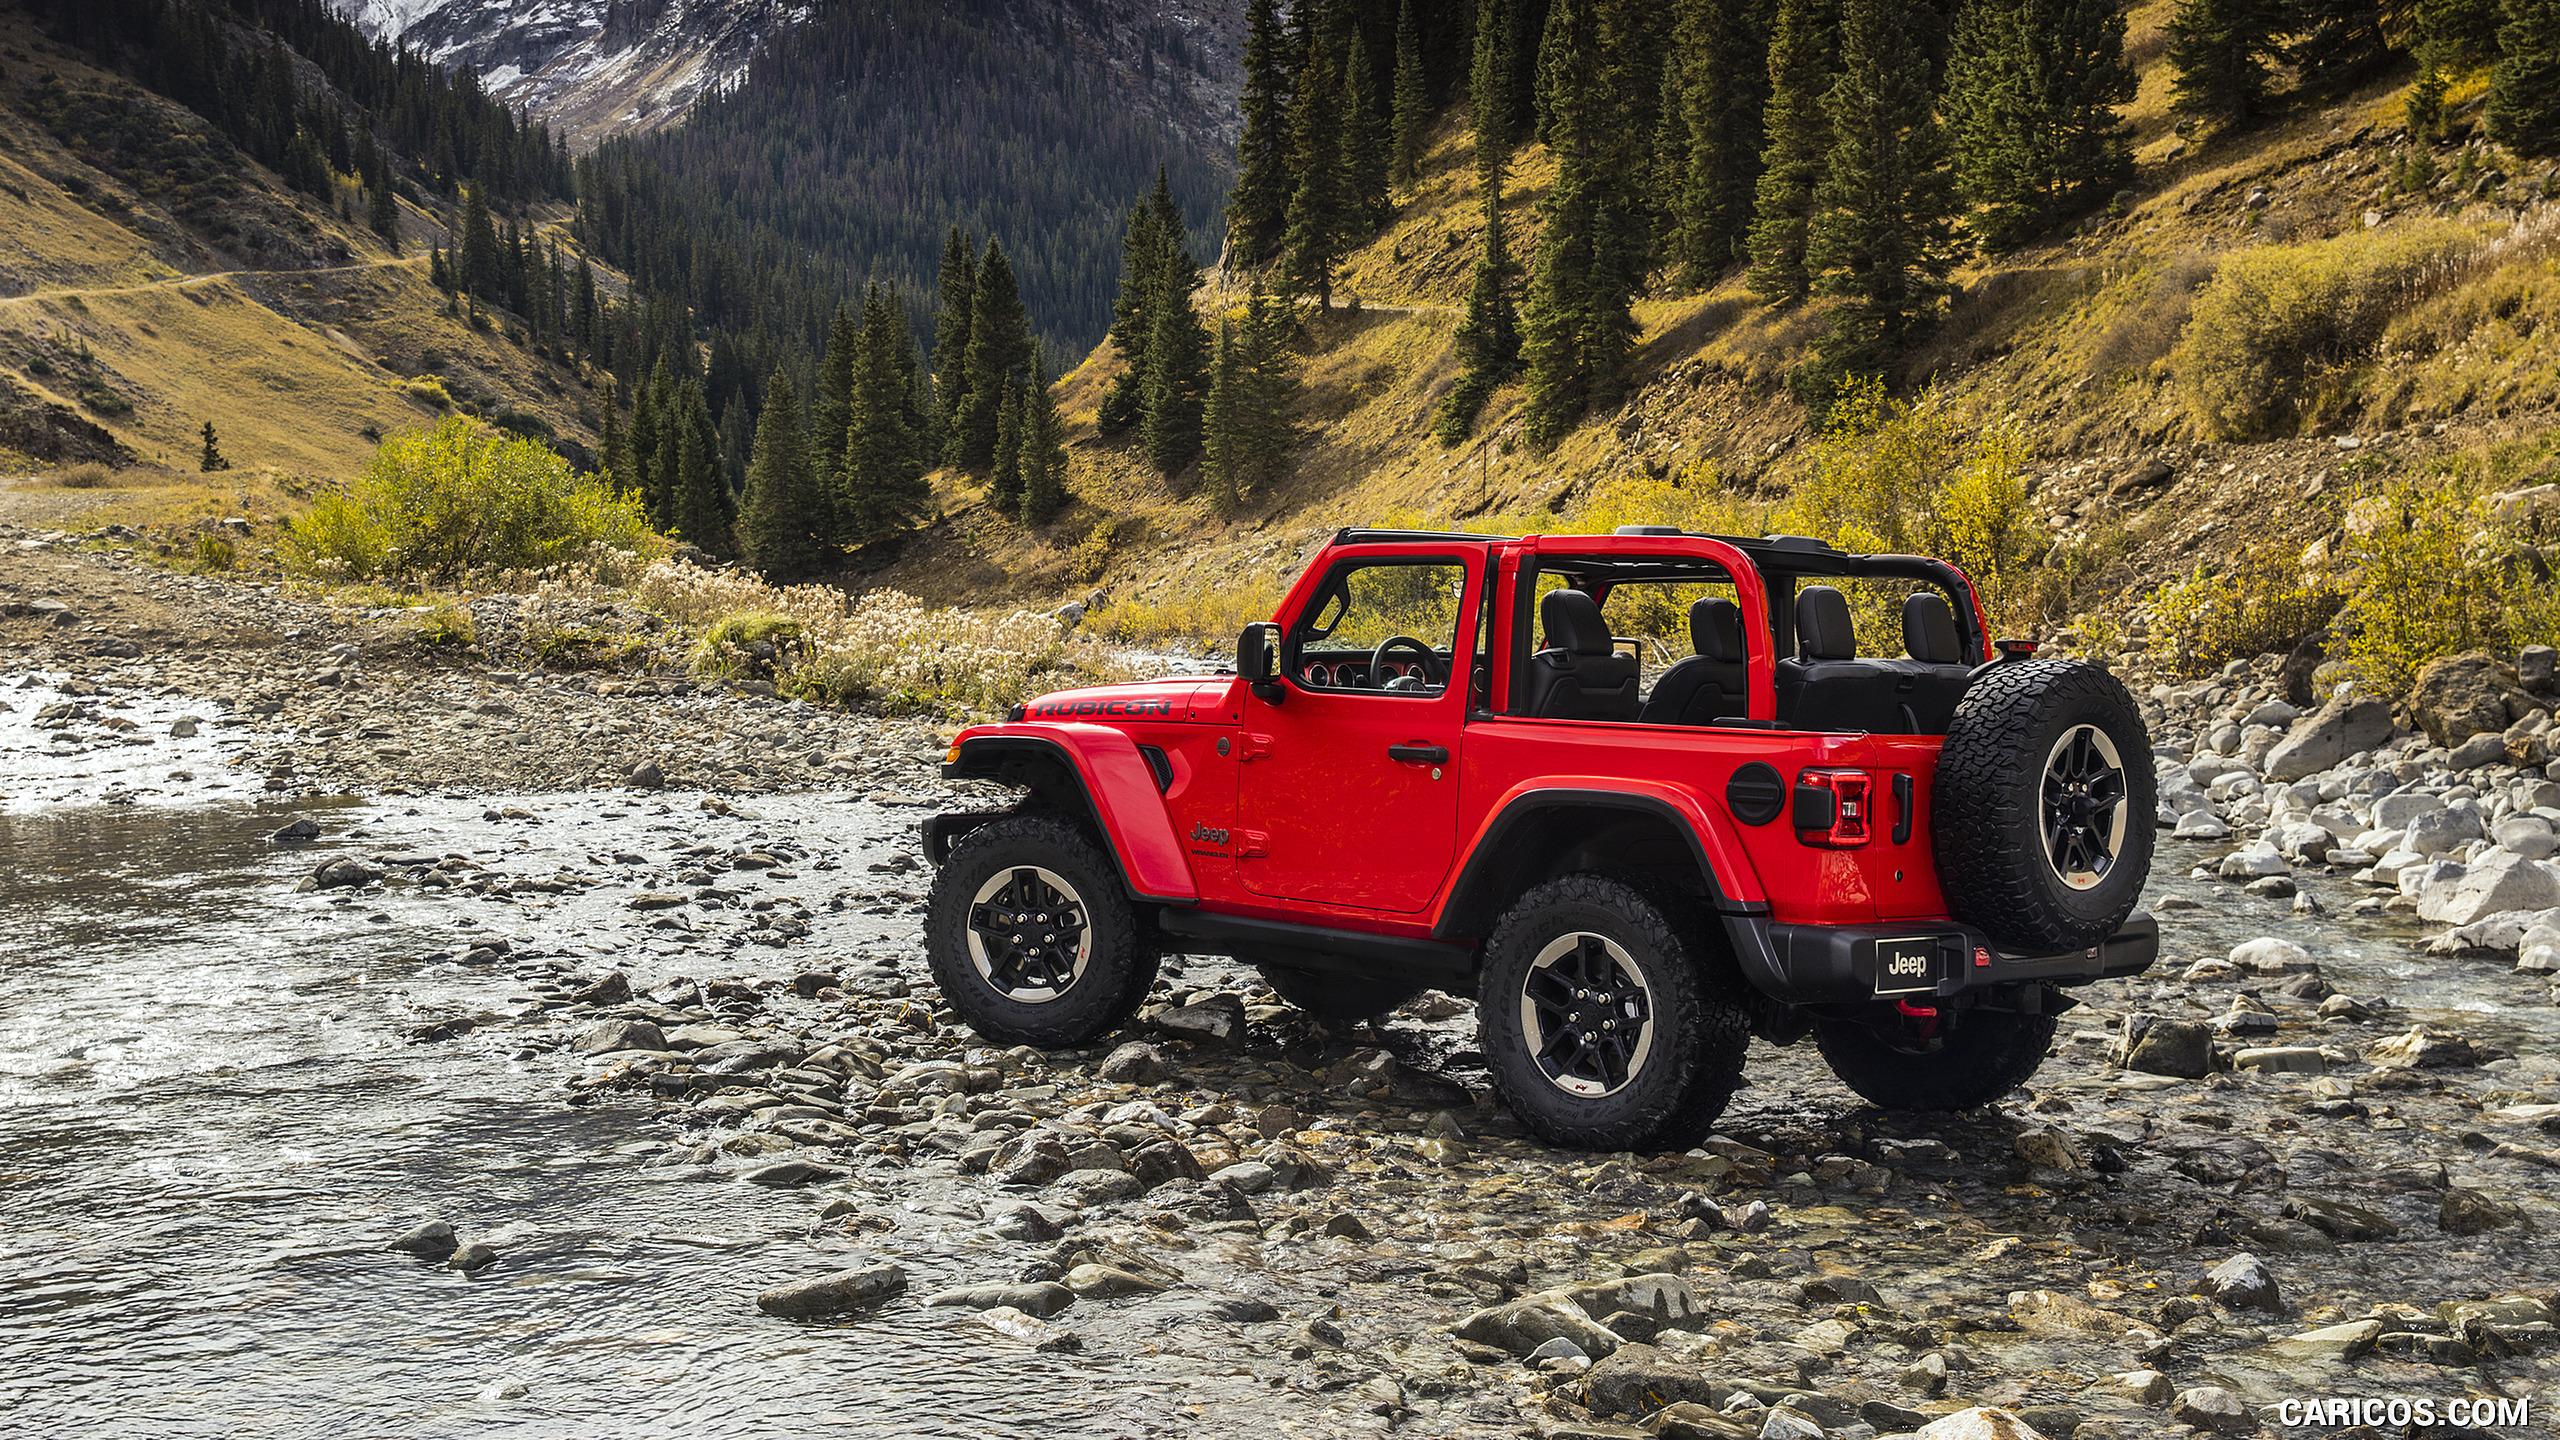 Download Jeep Wrangler wallpapers for mobile phone free Jeep Wrangler  HD pictures